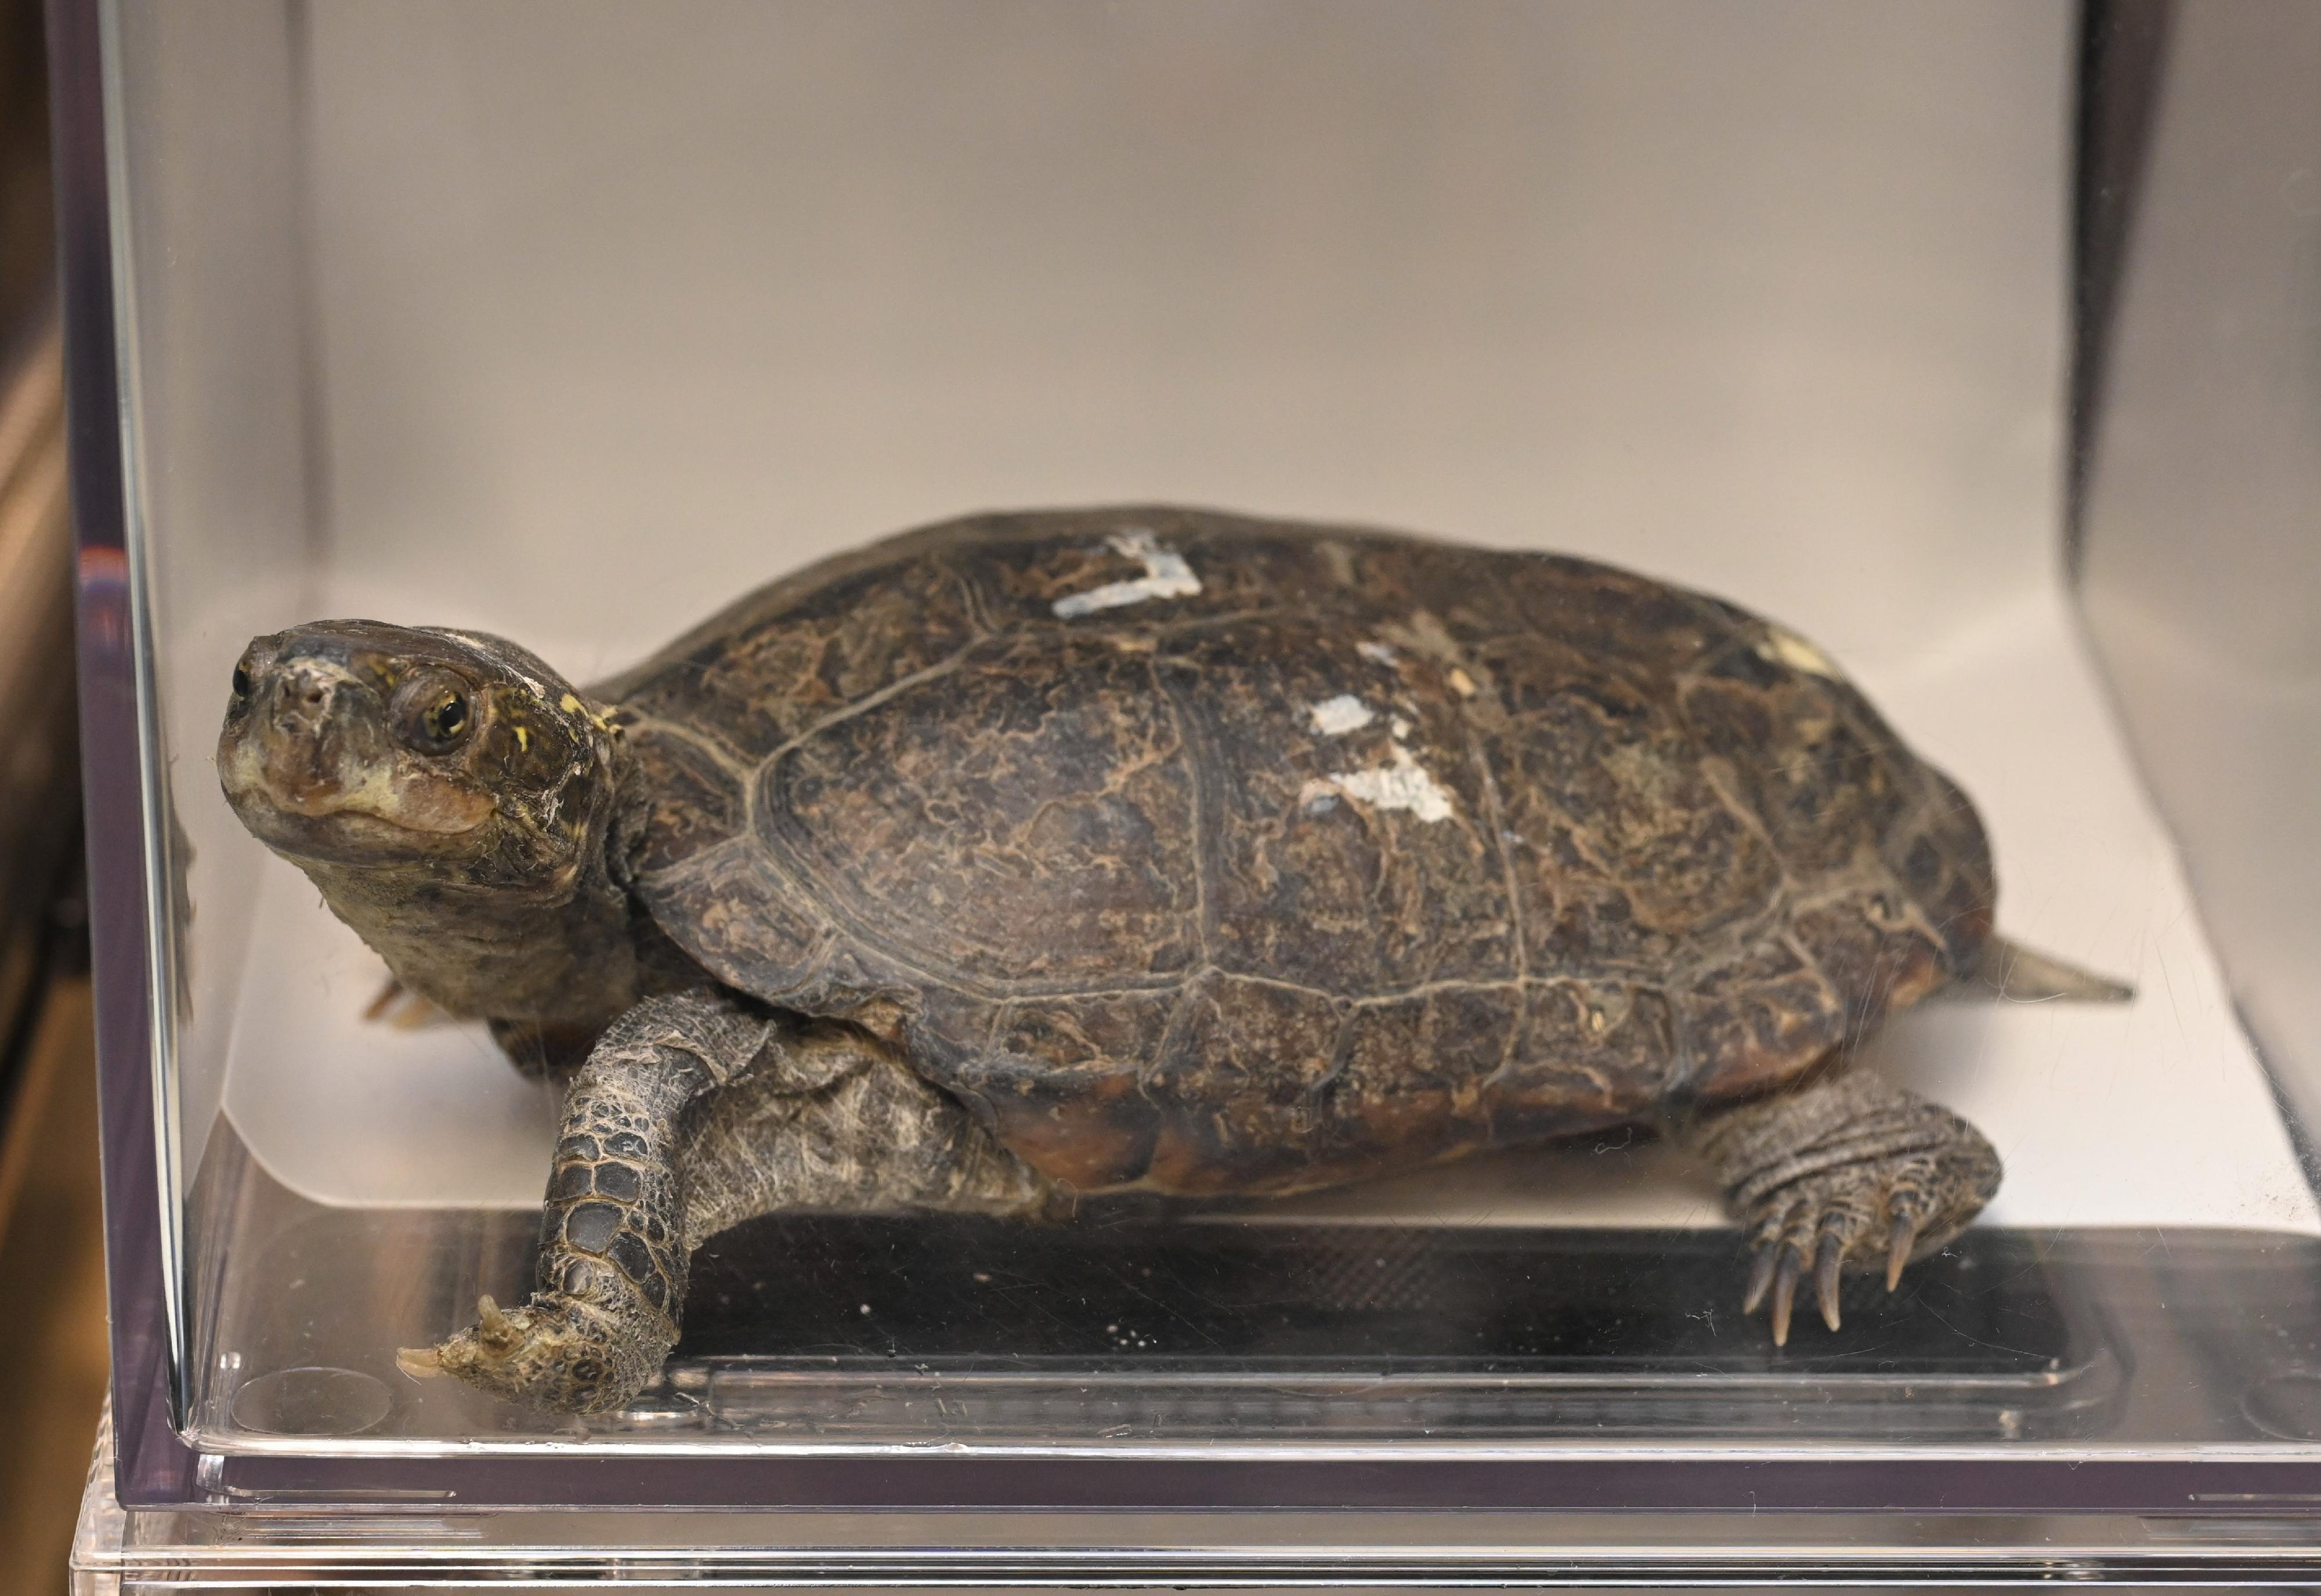 The Agriculture, Fisheries and Conservation Department conducted a joint operation with the Police on July 19. Twenty-nine specimens of endangered turtles, seven suspected turtle eggs and some tools suspected for hunting purposes were seized on some premises in Tai Po and a male suspect was arrested. Photo shows one of the seized Reeve's turtles (Mauremys reevesii).